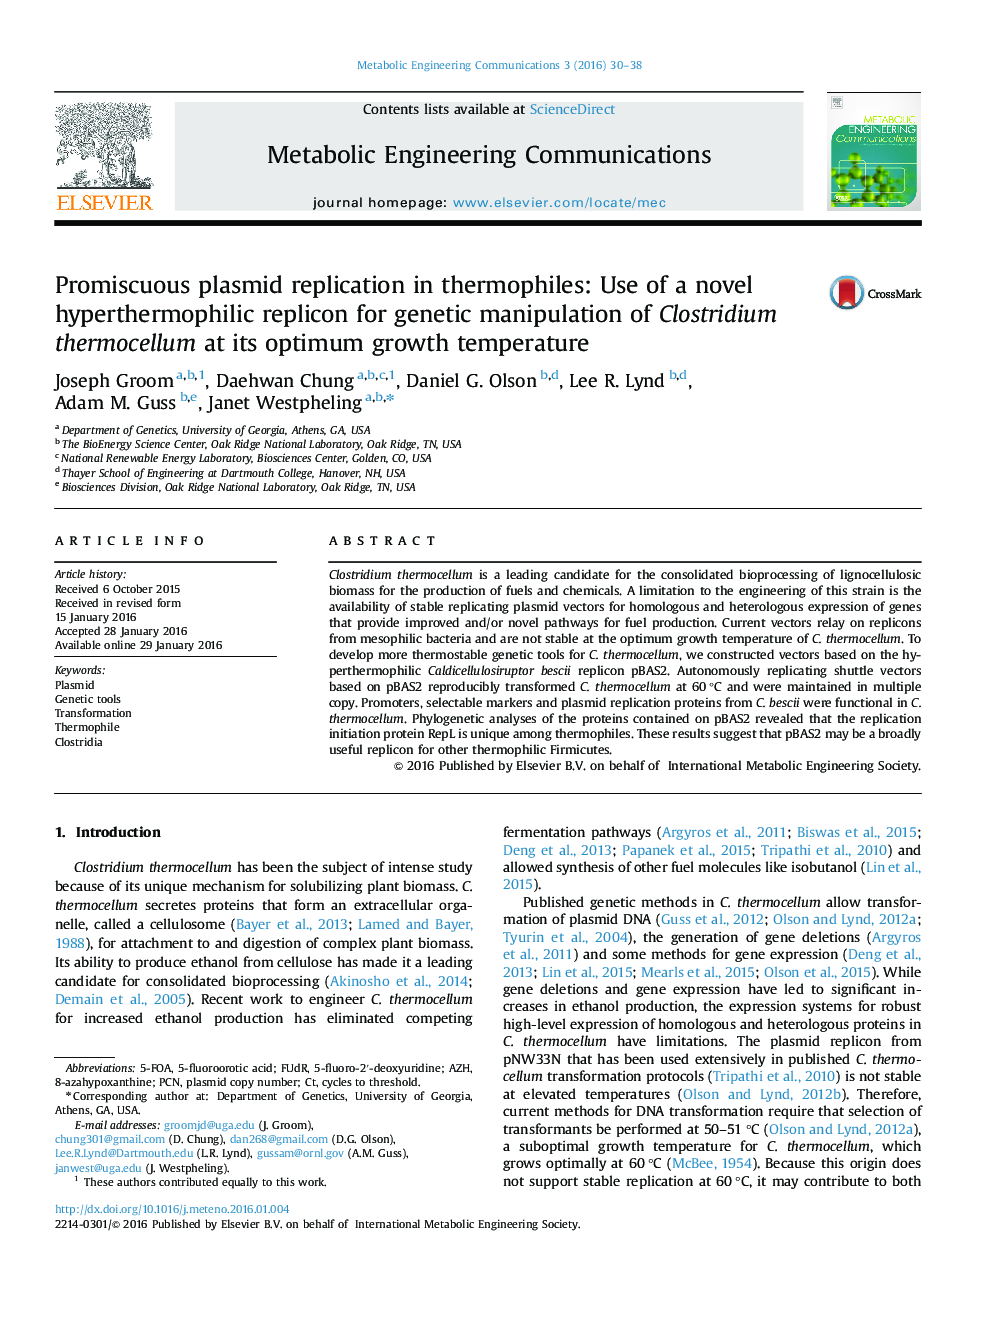 Promiscuous plasmid replication in thermophiles: Use of a novel hyperthermophilic replicon for genetic manipulation of Clostridium thermocellum at its optimum growth temperature